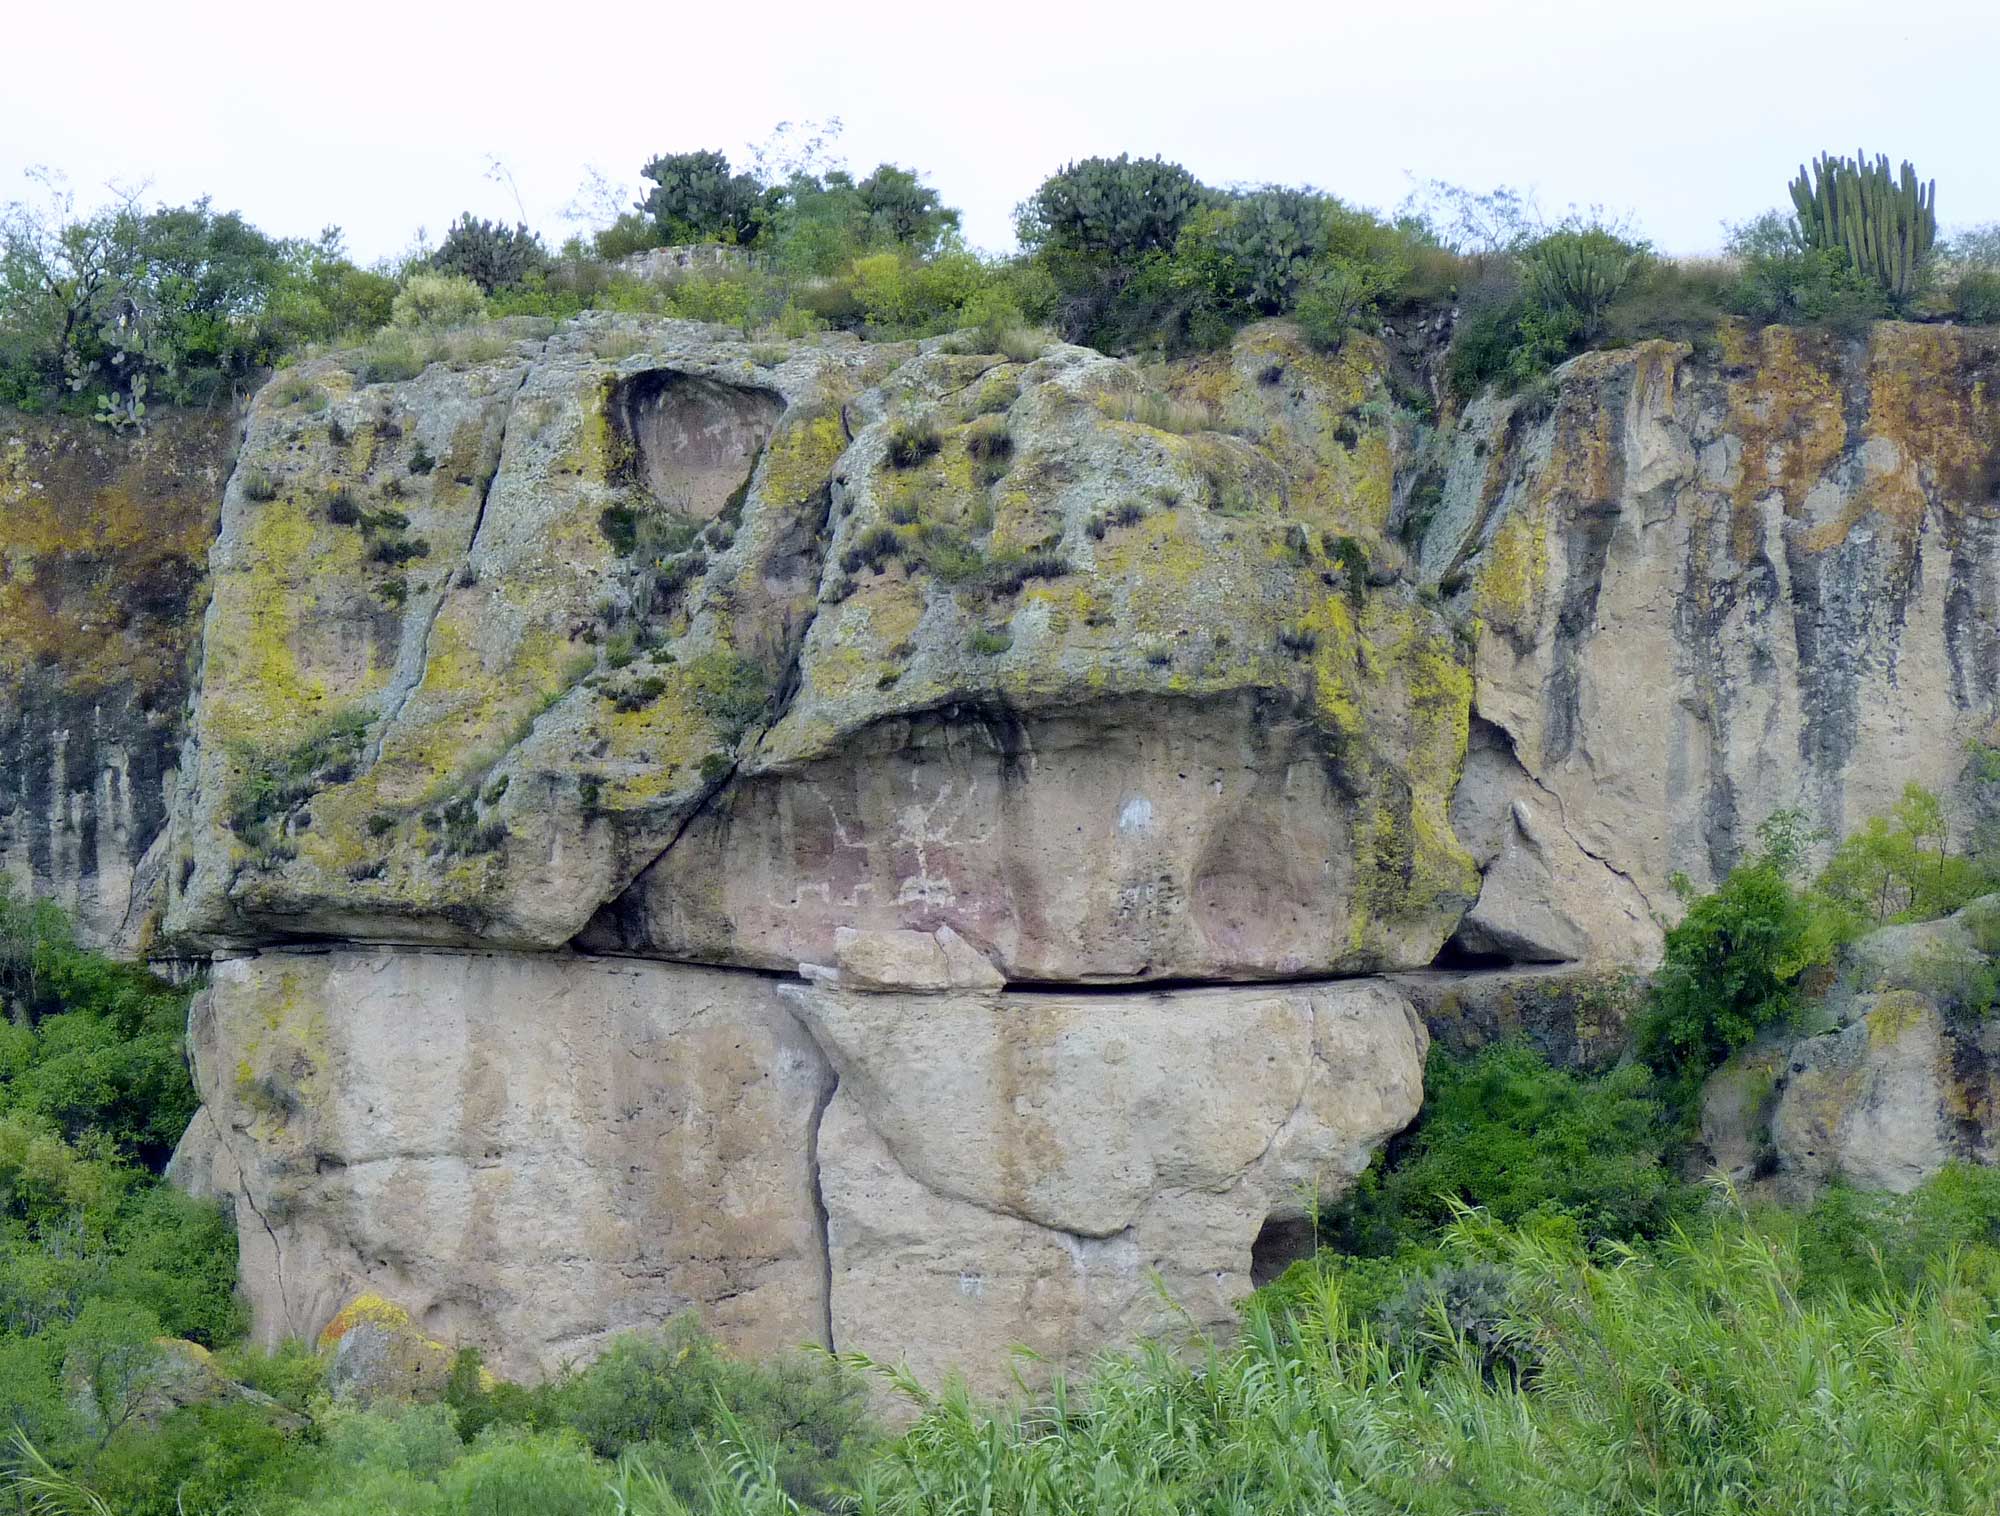 Photograph of Guilá Naquitz cave in Oaxaca, Mexico. The photo shows a rock bluff with sparse petroglyphs high off the ground. Vegetation occurs at the base and on top of the bluff.